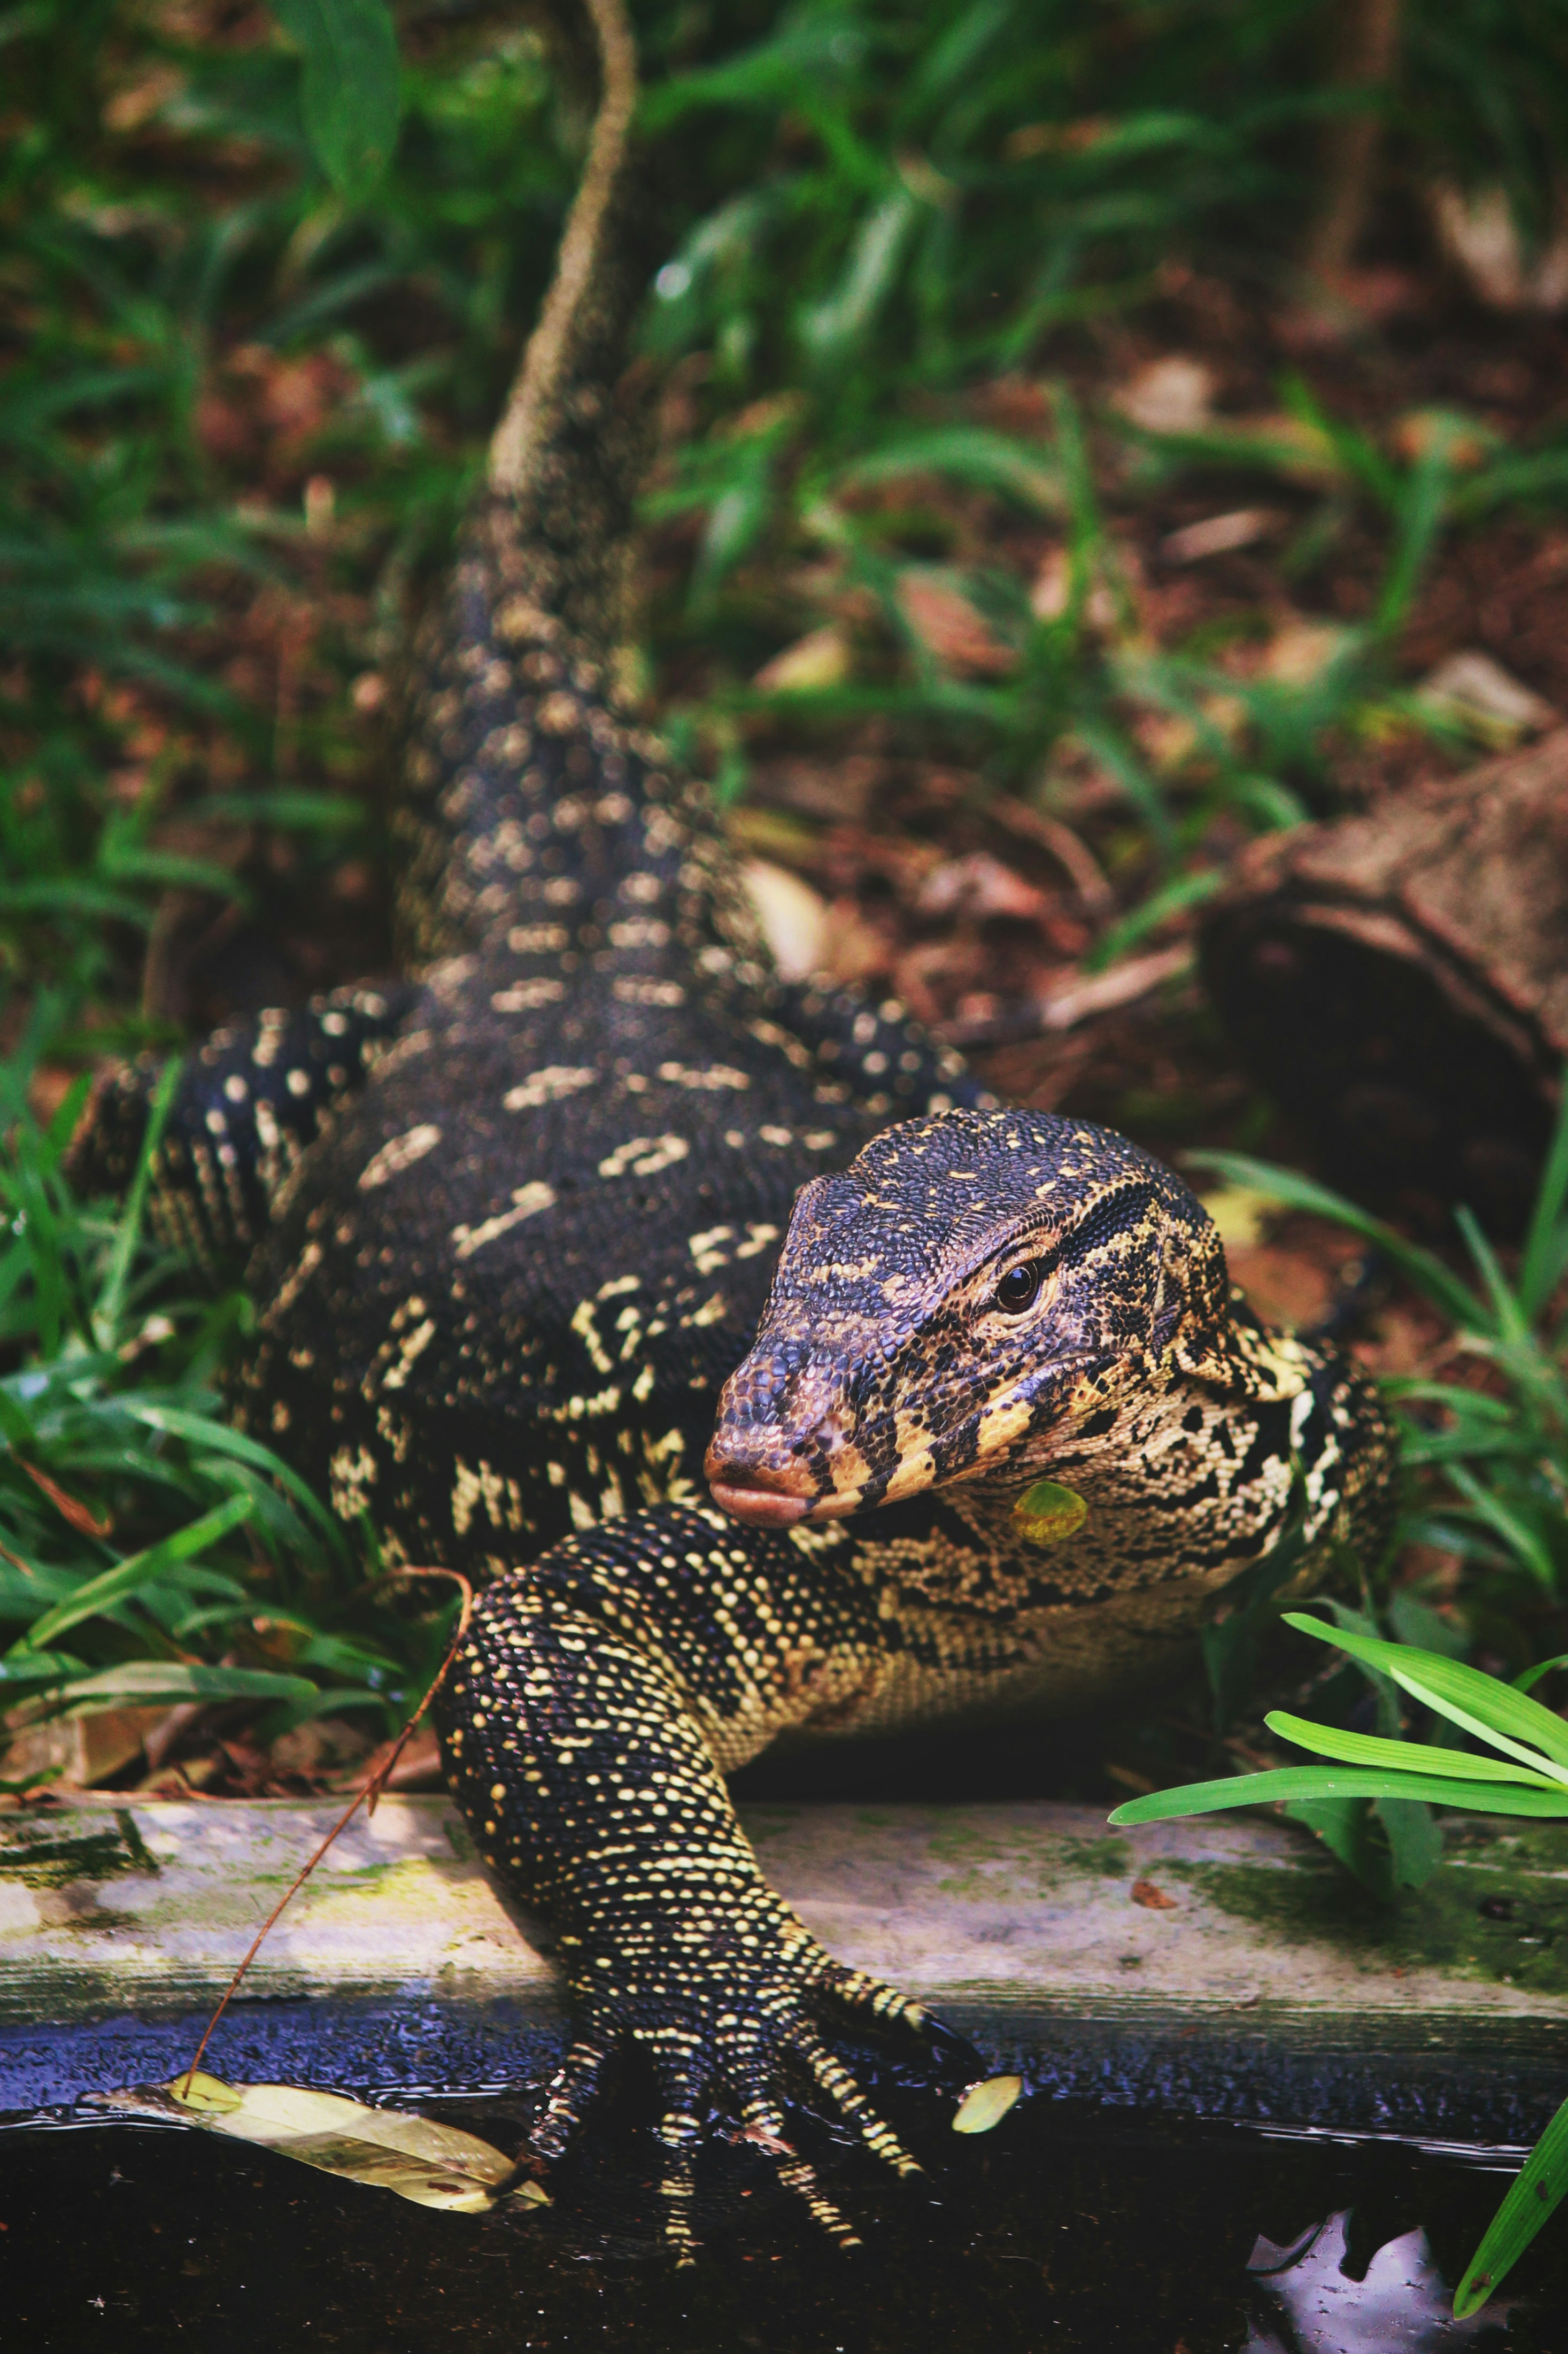 The Asian Water Monitor or water dragon in India